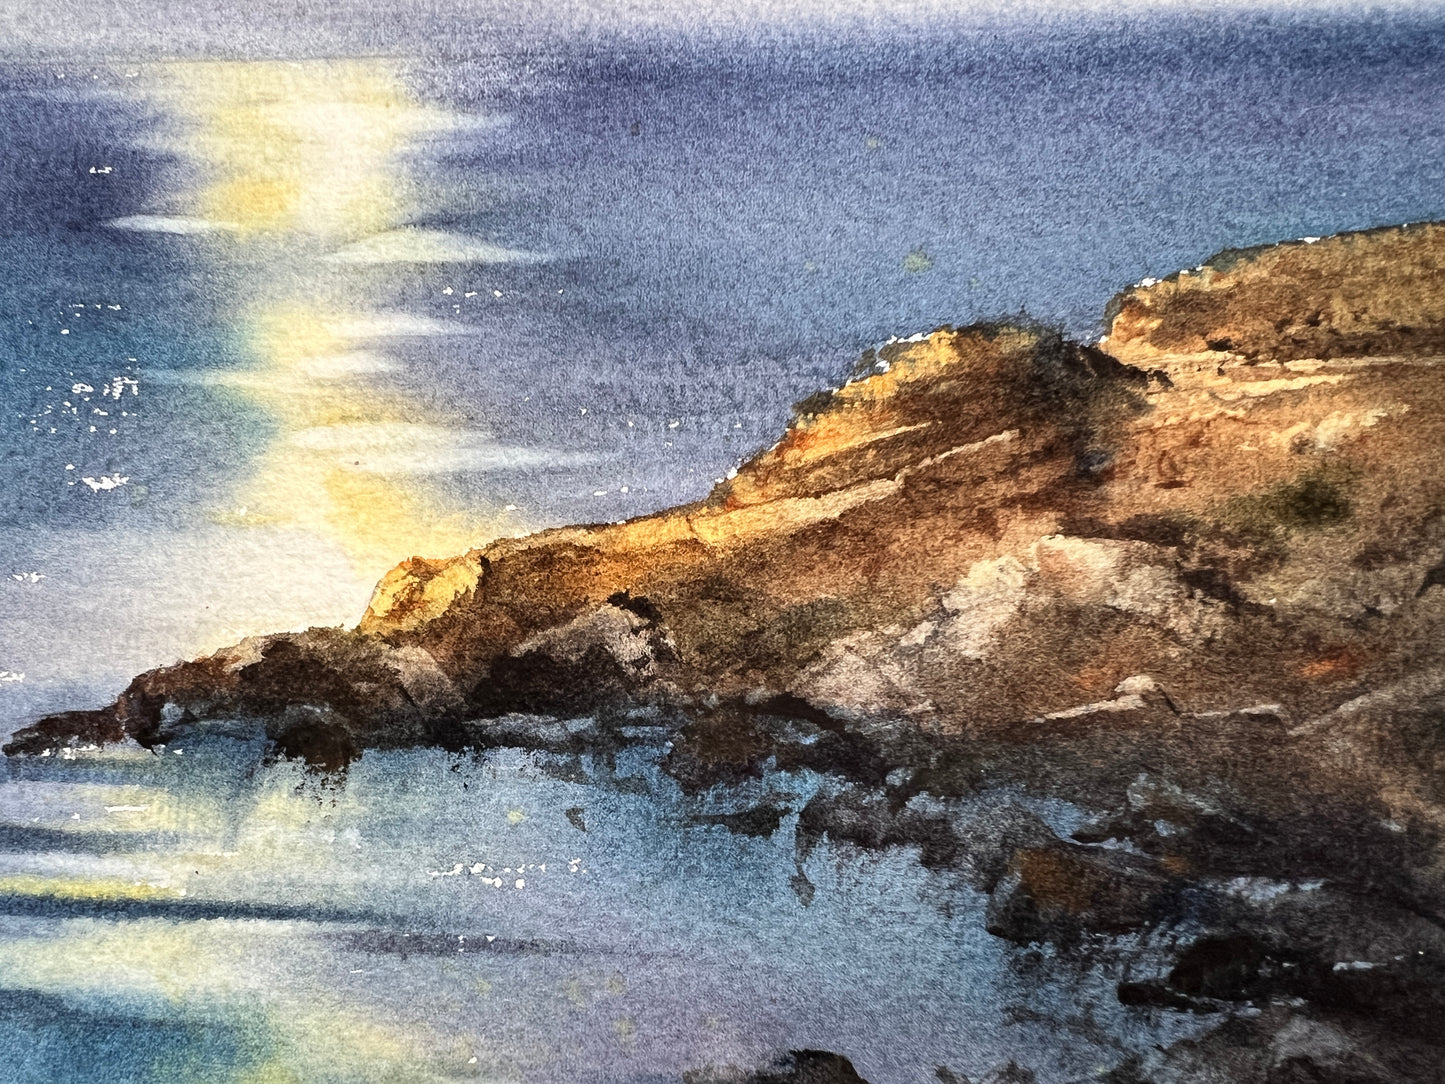 "Full Moon #4" Original Watercolor, Night Sea Art for Nautical Decor Enthusiasts, Hand-Painted Seascape, Maritime Collector Gift